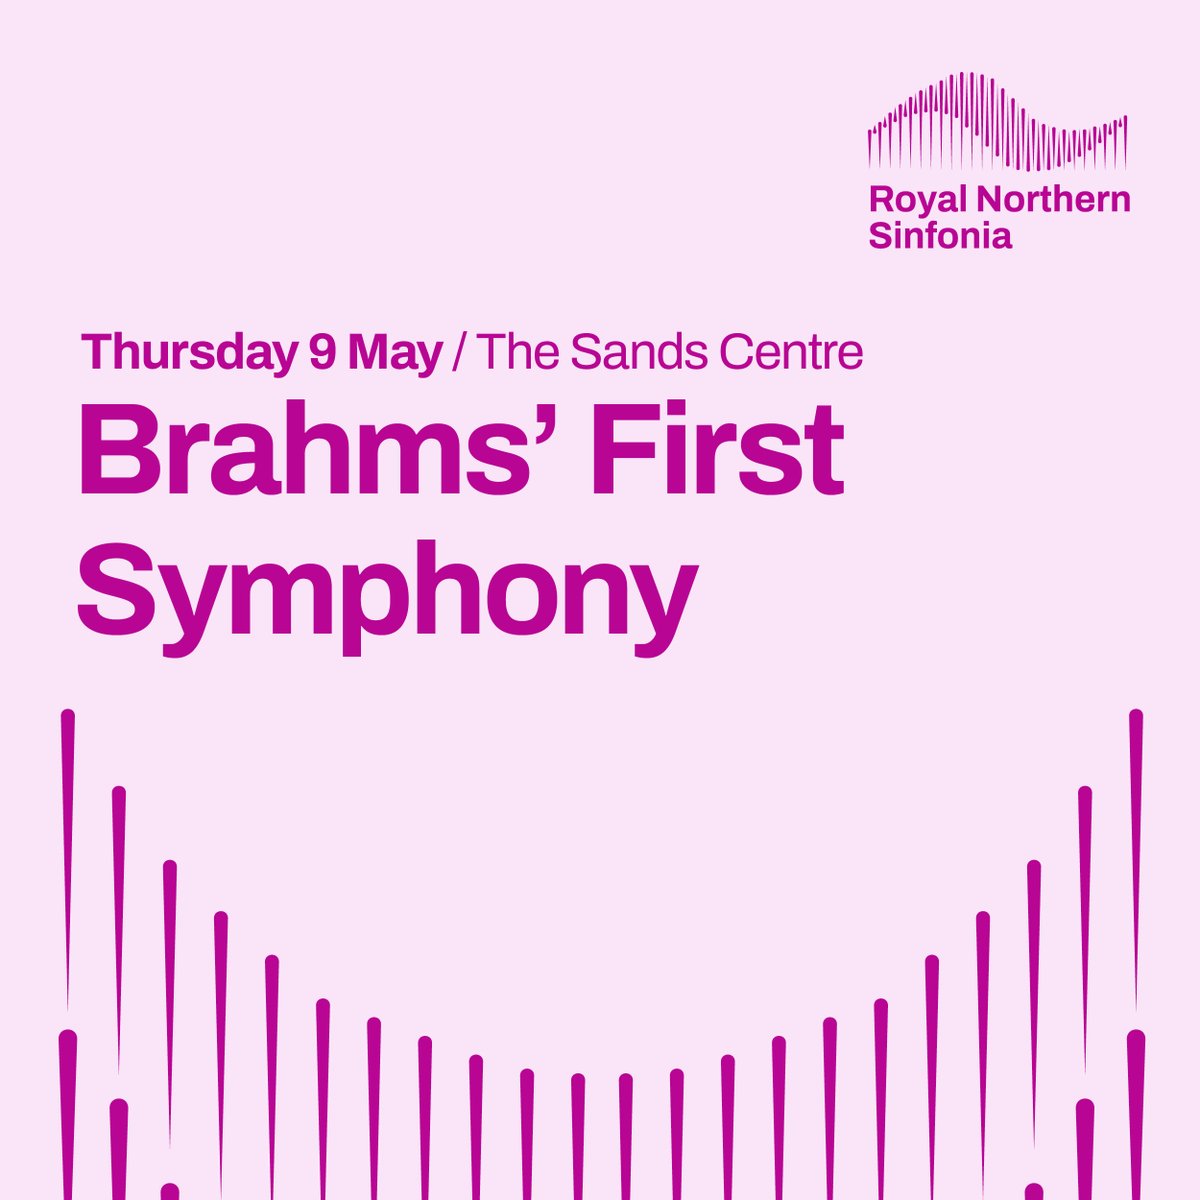 We're starting the month with @JessGillamSax and @CVansoeterstede at @SandsCentre in Carlisle with Brahms' First Symphony on Thu 9 May. 🎟️ bit.ly/4aXtcjw